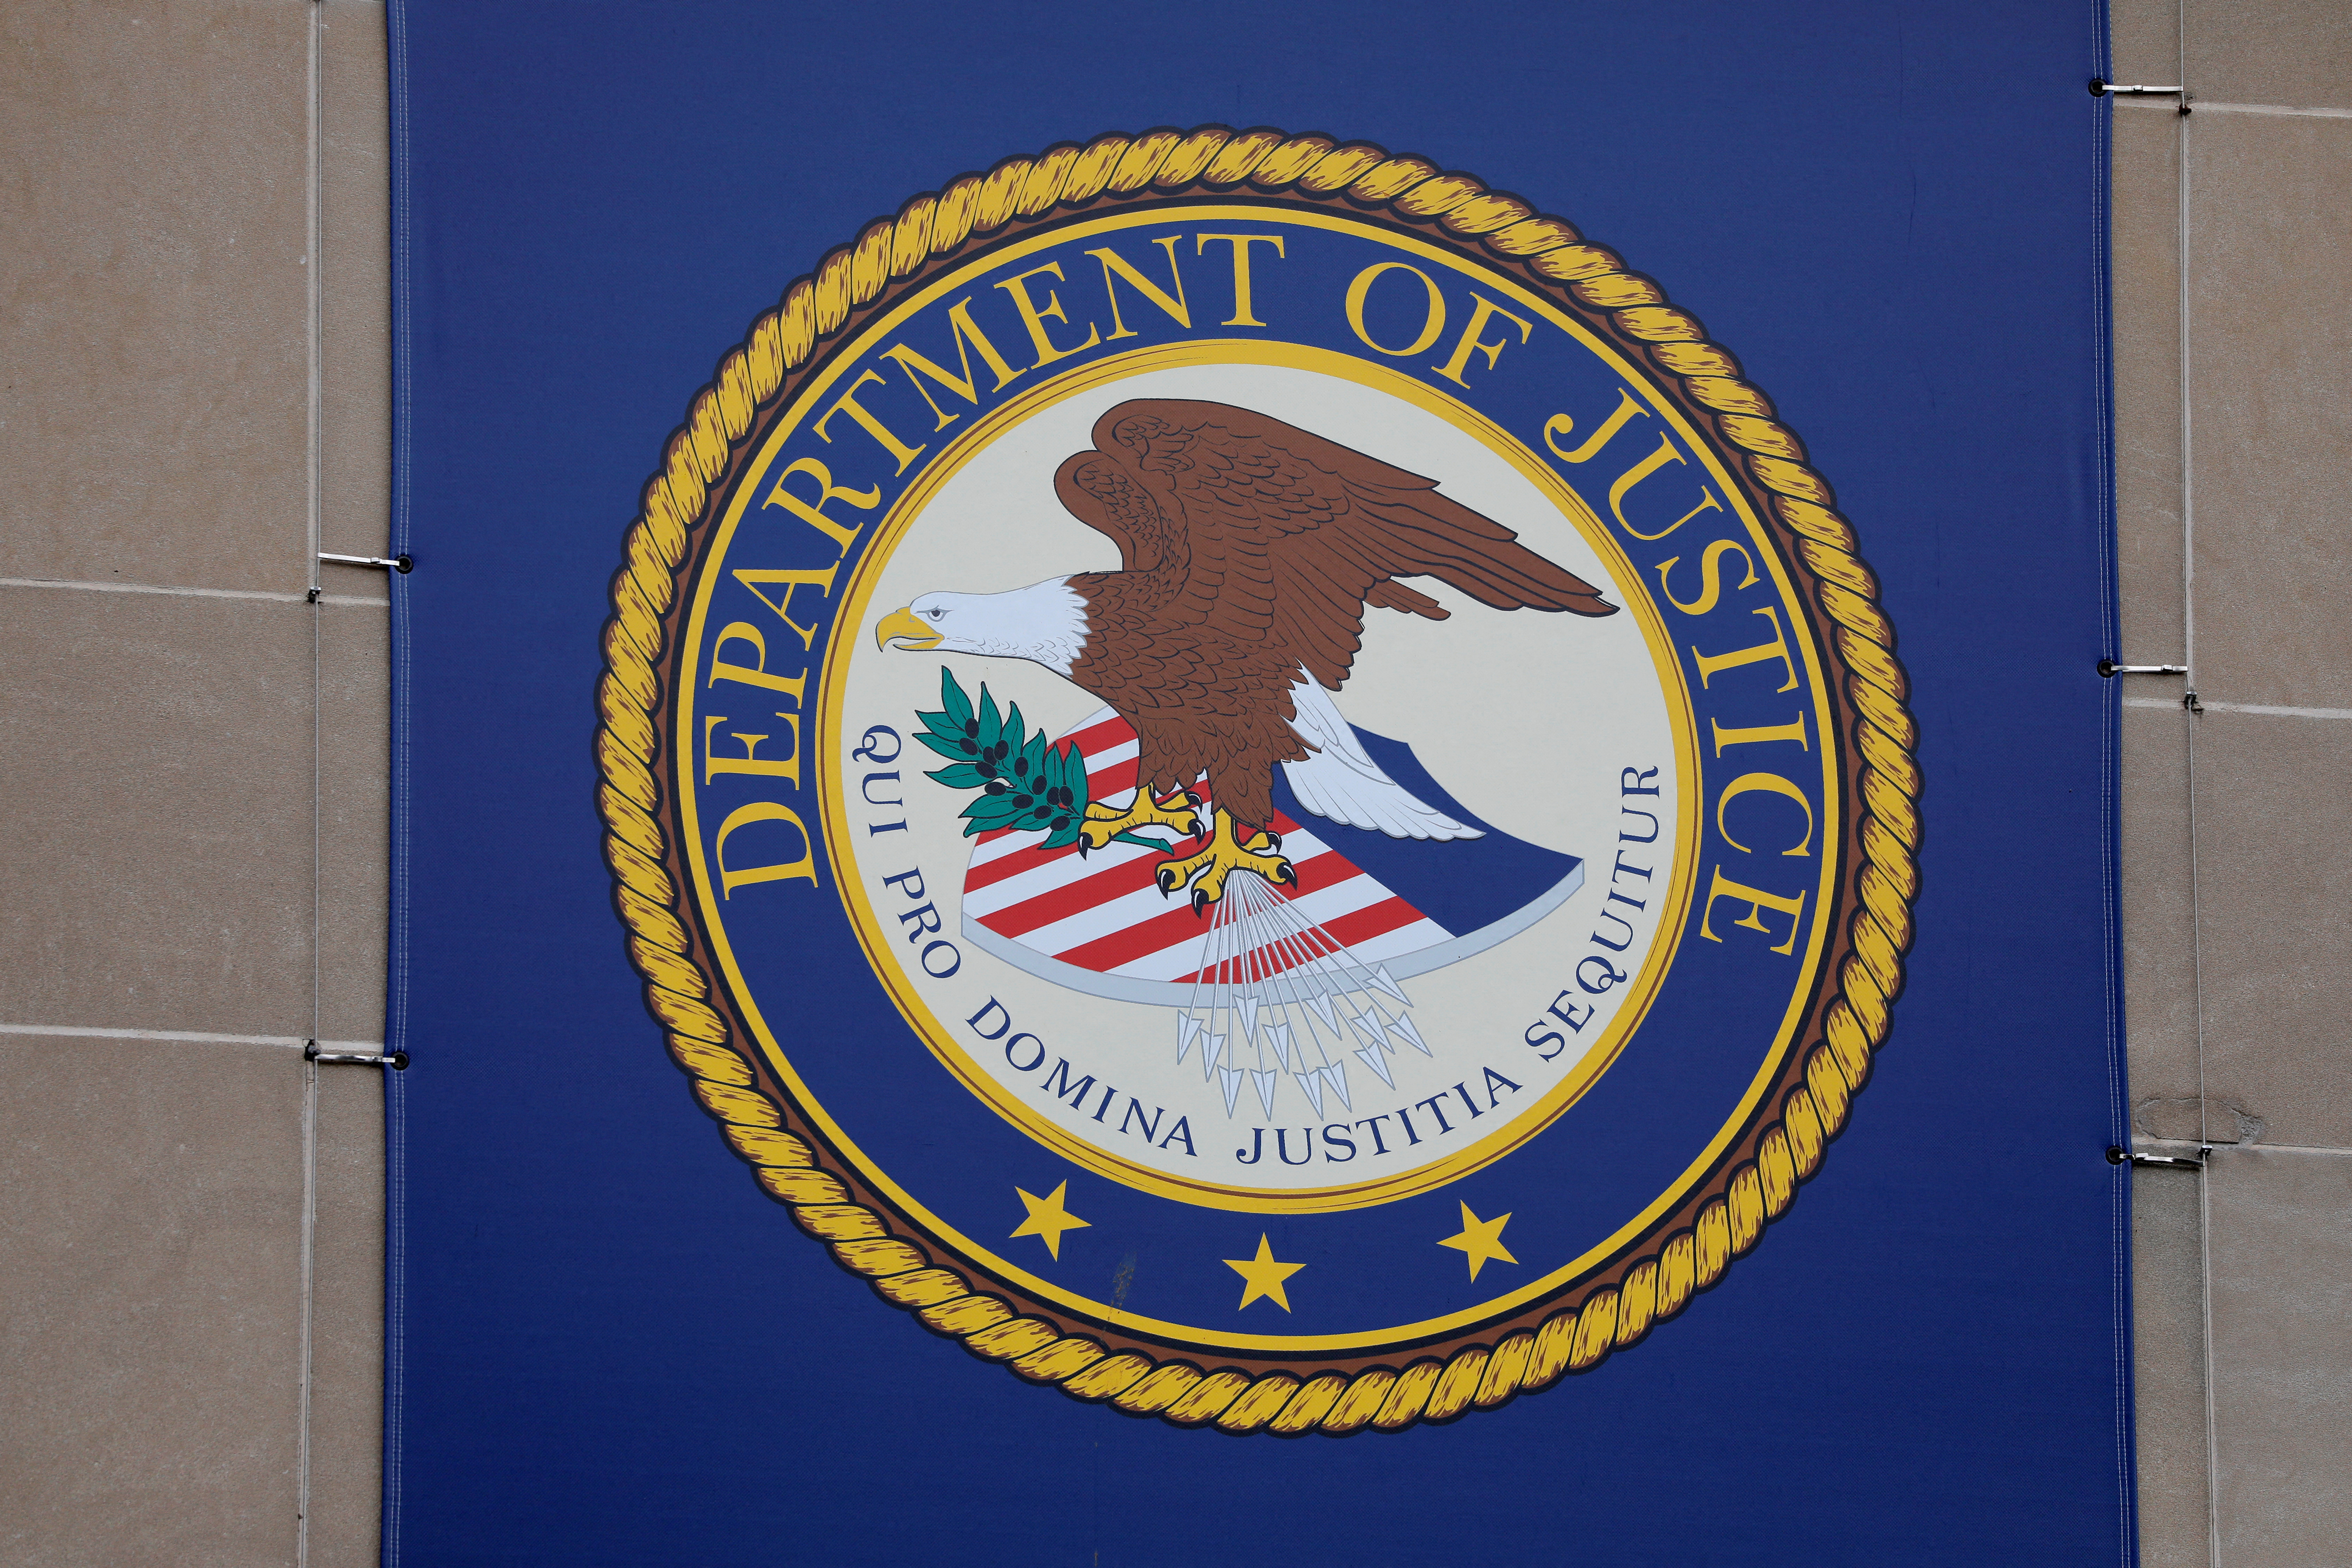 The crest of the United States Department of Justice is seen at its headquarters in Washington, D.C.